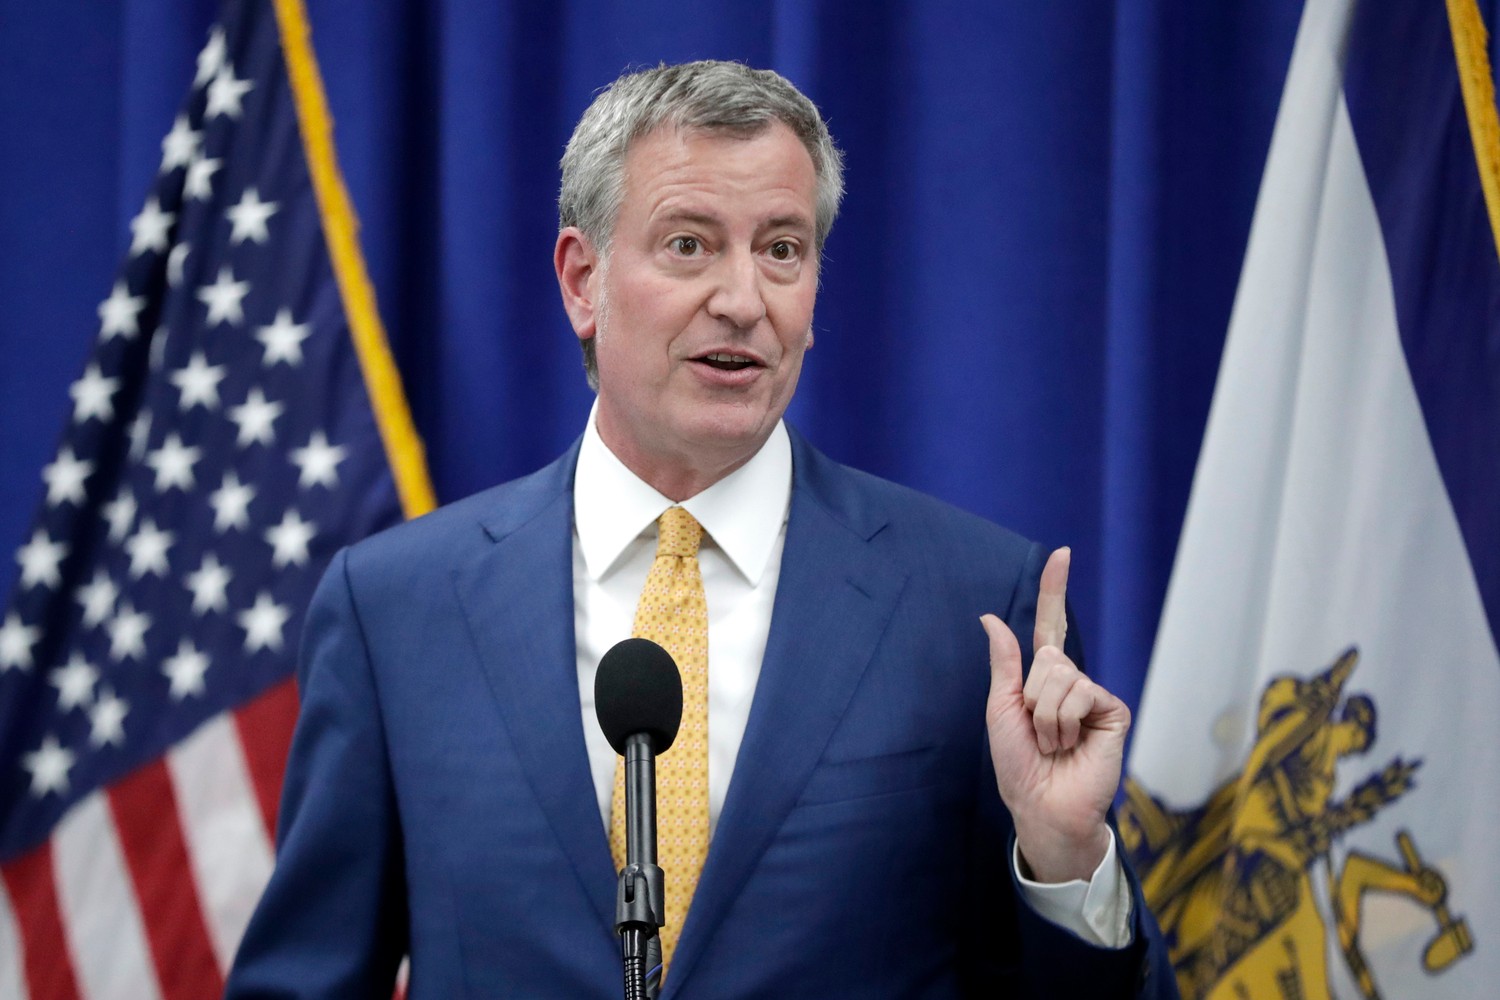 New York City Mayor Bill De Blasio speaks during a news conference announcing a proposed ordinance to provide low income residents with access to free legal representation in landlord-tenant disputes, Tuesday, May 1, 2018, in Newark, N.J. (AP Photo/Julio Cortez)